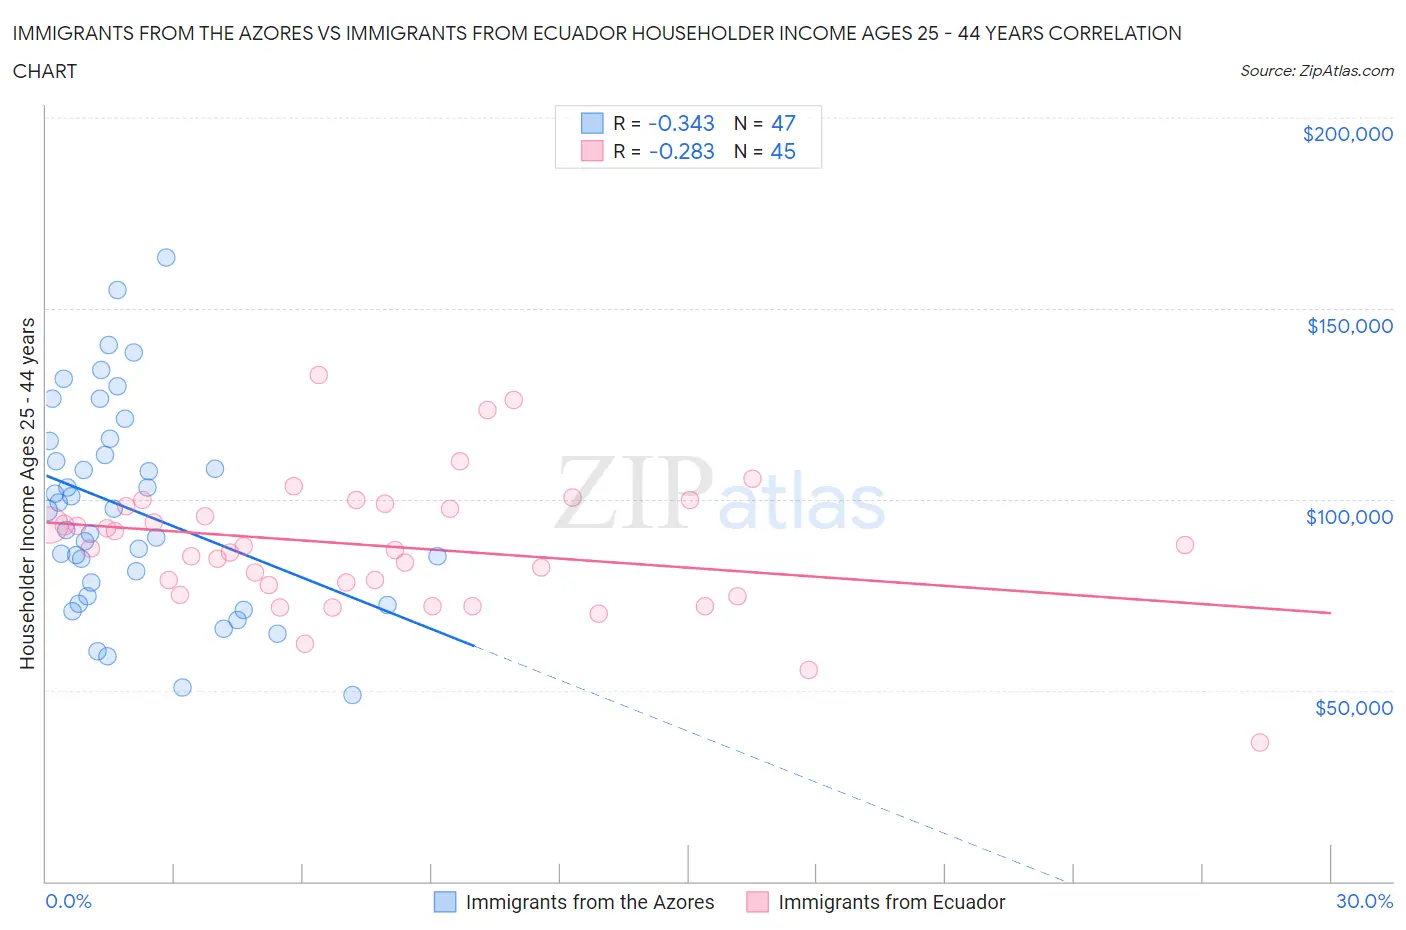 Immigrants from the Azores vs Immigrants from Ecuador Householder Income Ages 25 - 44 years